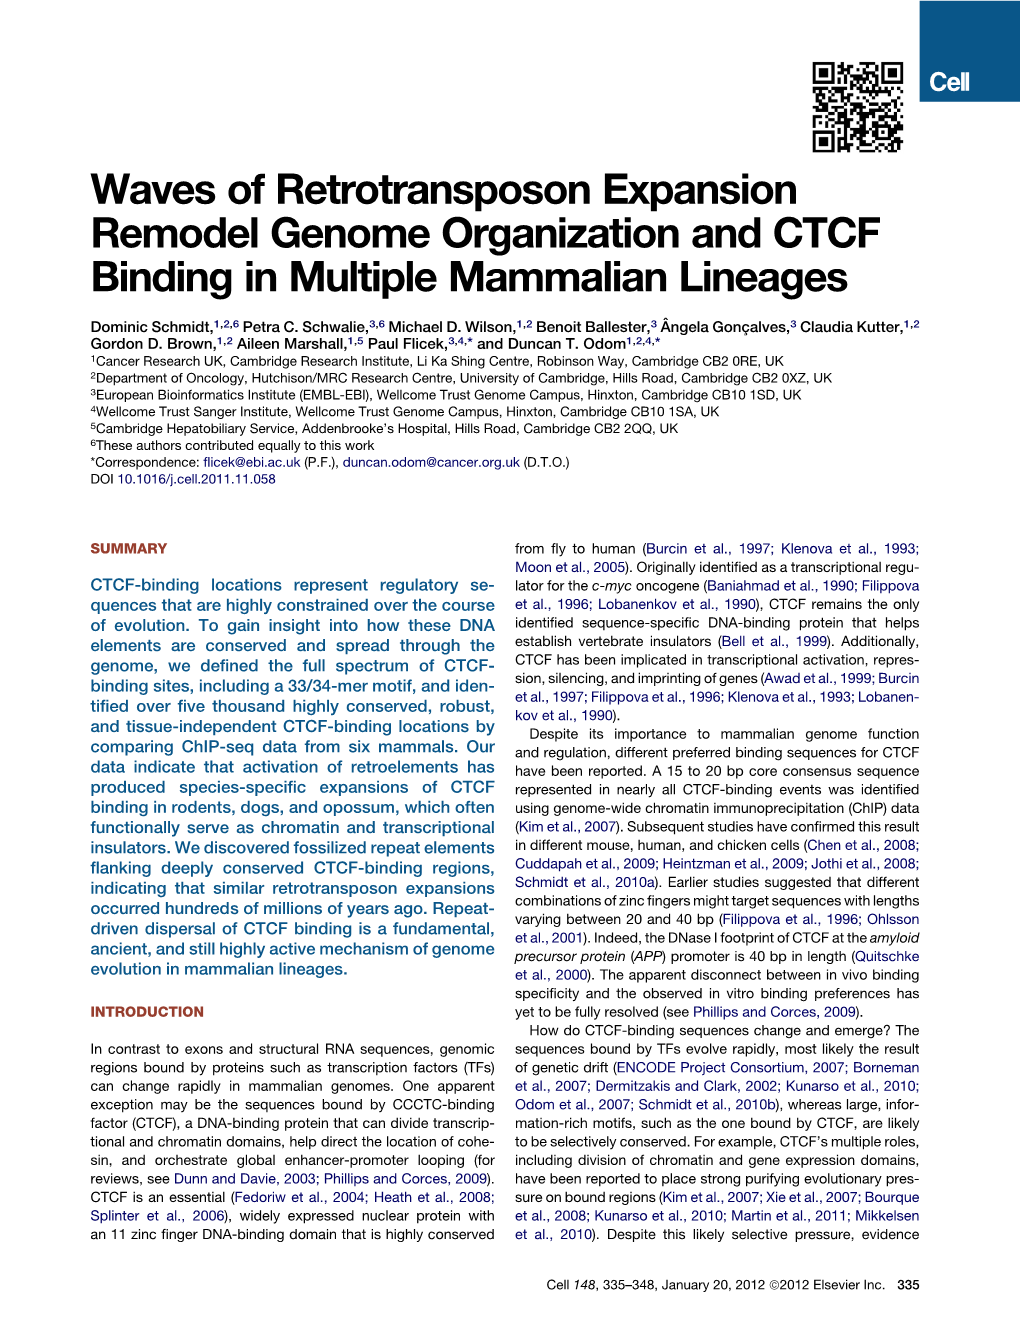 Waves of Retrotransposon Expansion Remodel Genome Organization and CTCF Binding in Multiple Mammalian Lineages